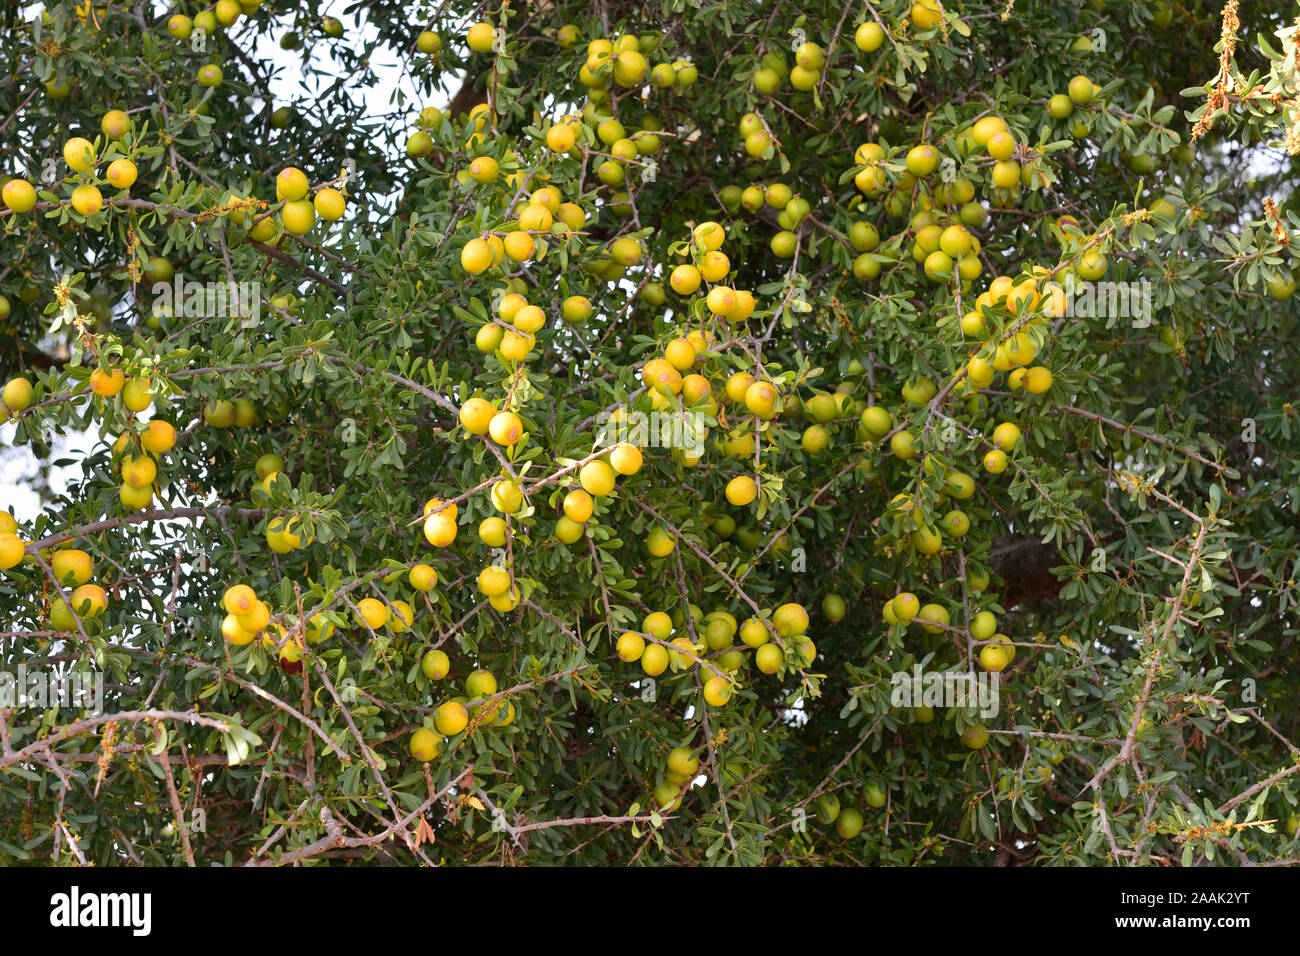 Fruits of the Argan tree. Argan oil has become a fashionable product in Europe and North America. Essaoiura, Morocco Stock Photo